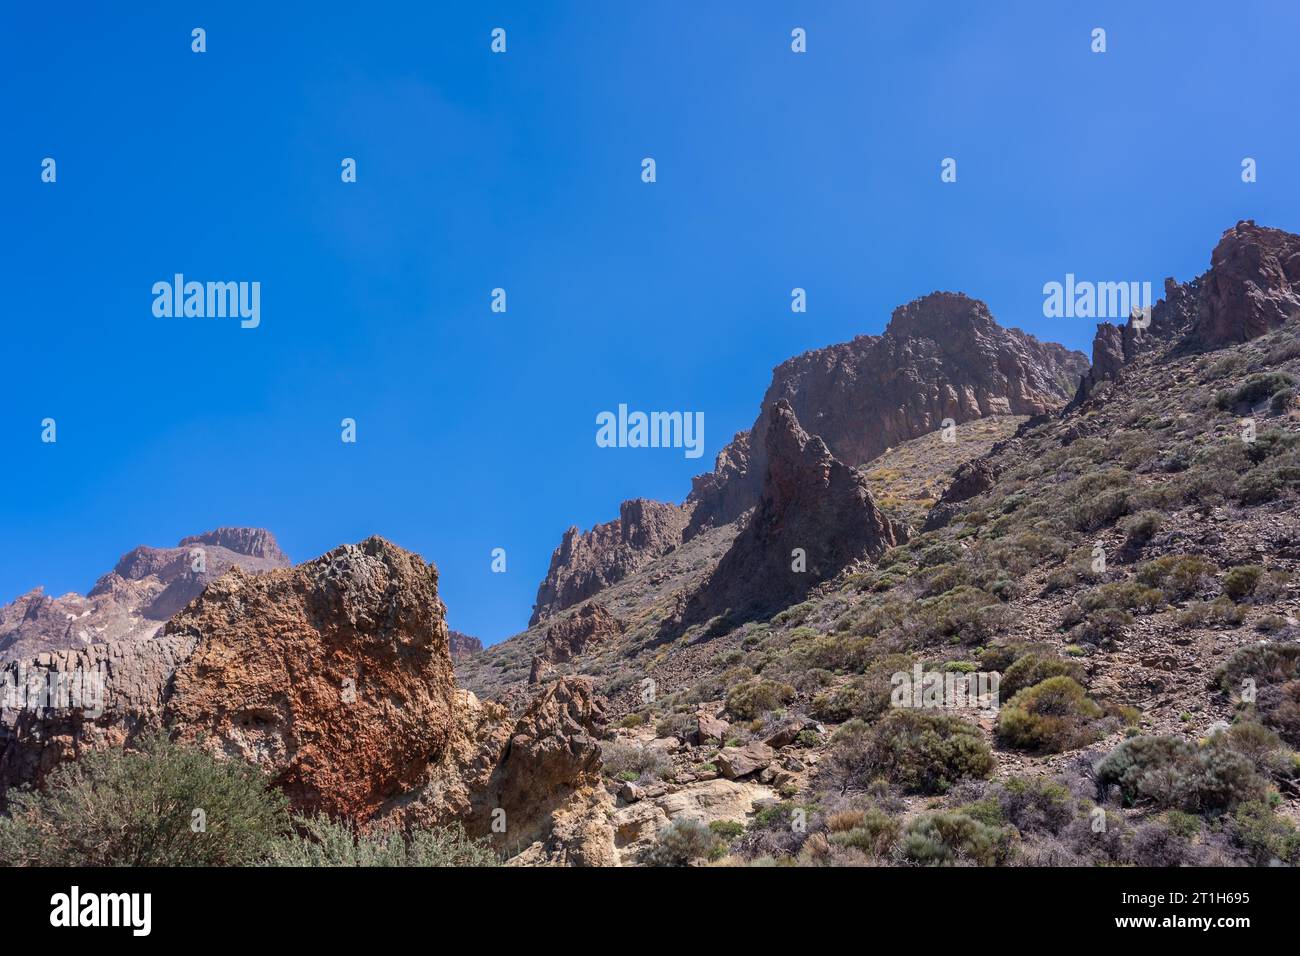 View from the Boca Tauce viewpoint in the Teide Natural Park in Tenerife, Canary Islands Stock Photo